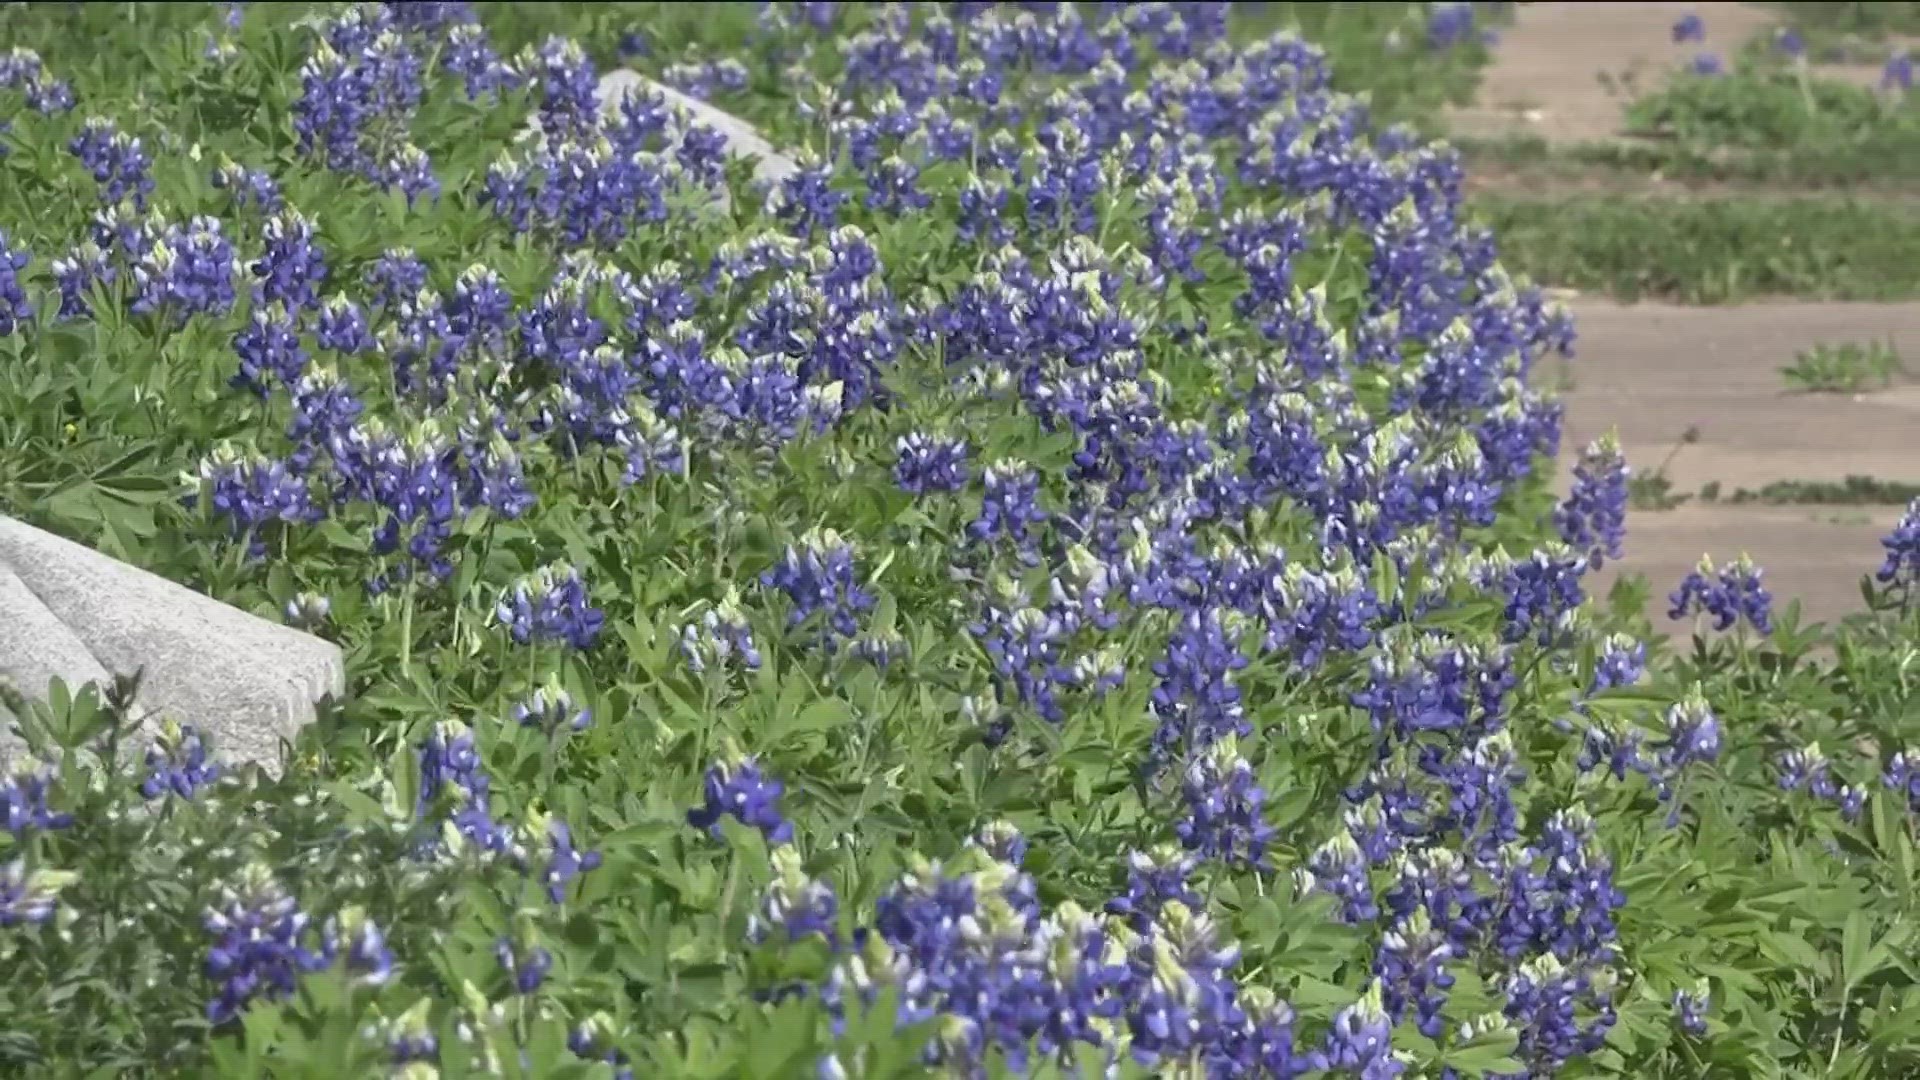 Spring has sprung! Bluebonnets are appearing a bit earlier than usual this year. KVUE's Pamela Comme spoke with experts about the early season.